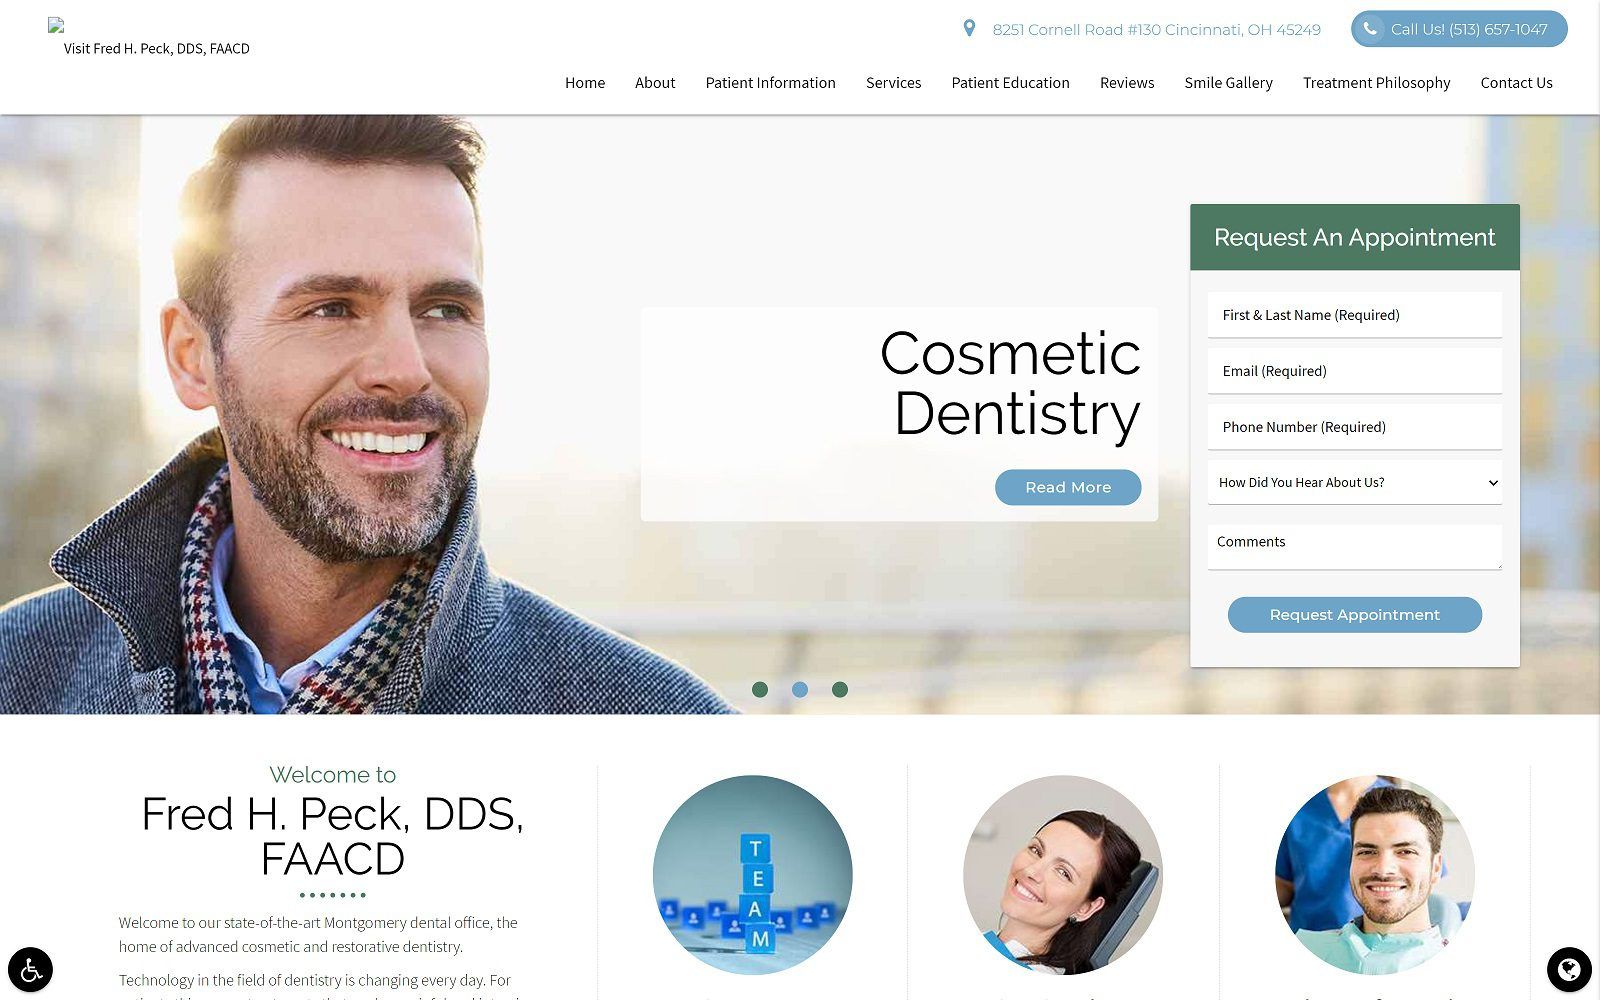 The screenshot of fred h. Peck, dds website